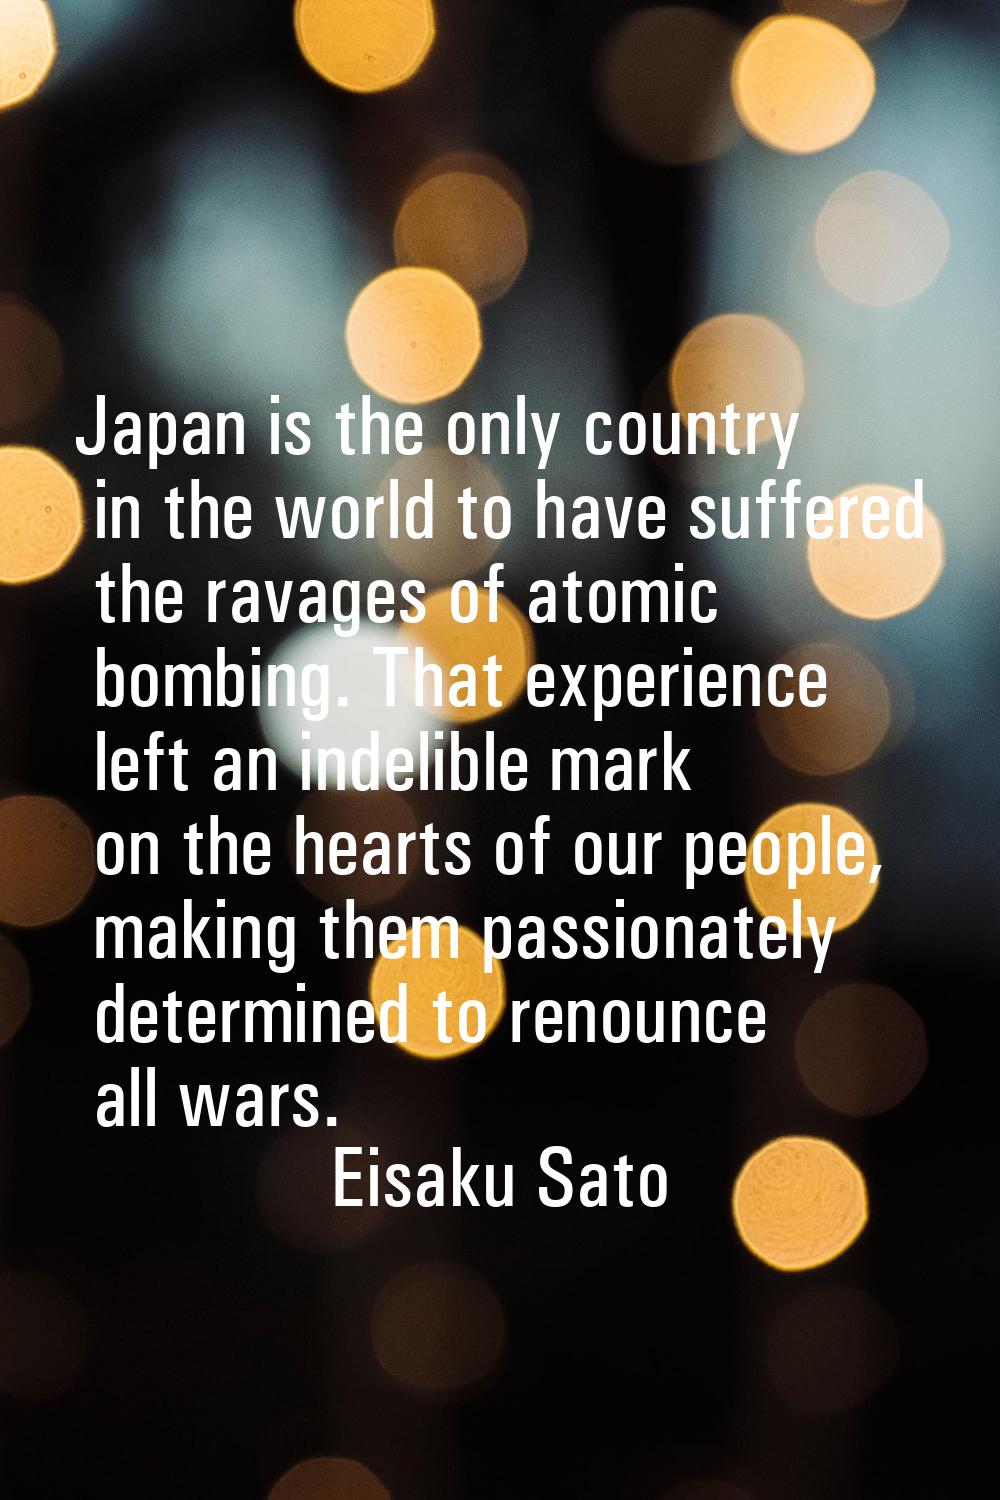 Japan is the only country in the world to have suffered the ravages of atomic bombing. That experie